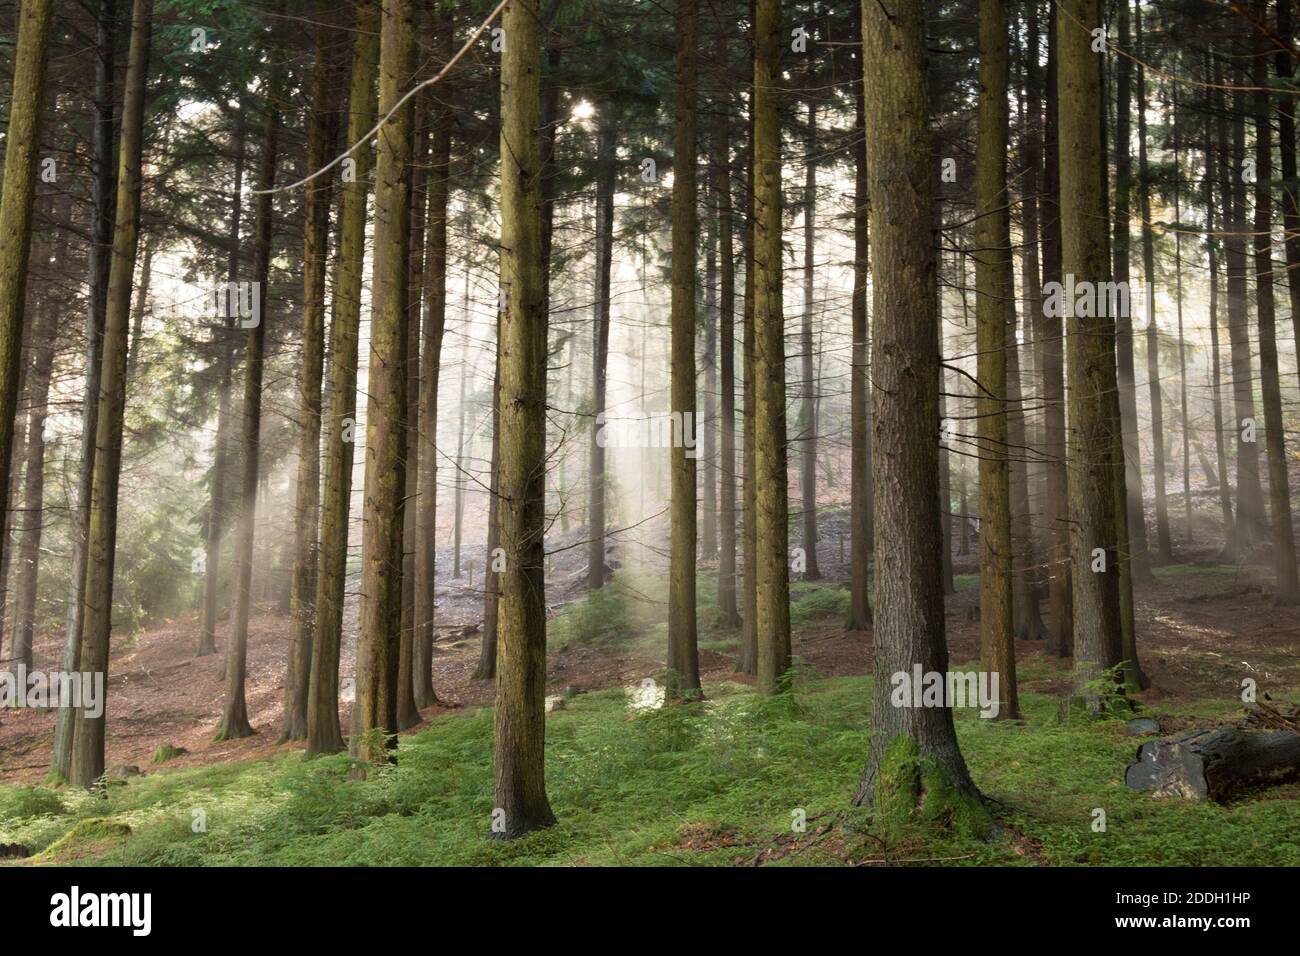 sun rays streaming through mist in forest plantation of Hemlock trees, tall, grown for timber. Sussex, UK, November Stock Photo